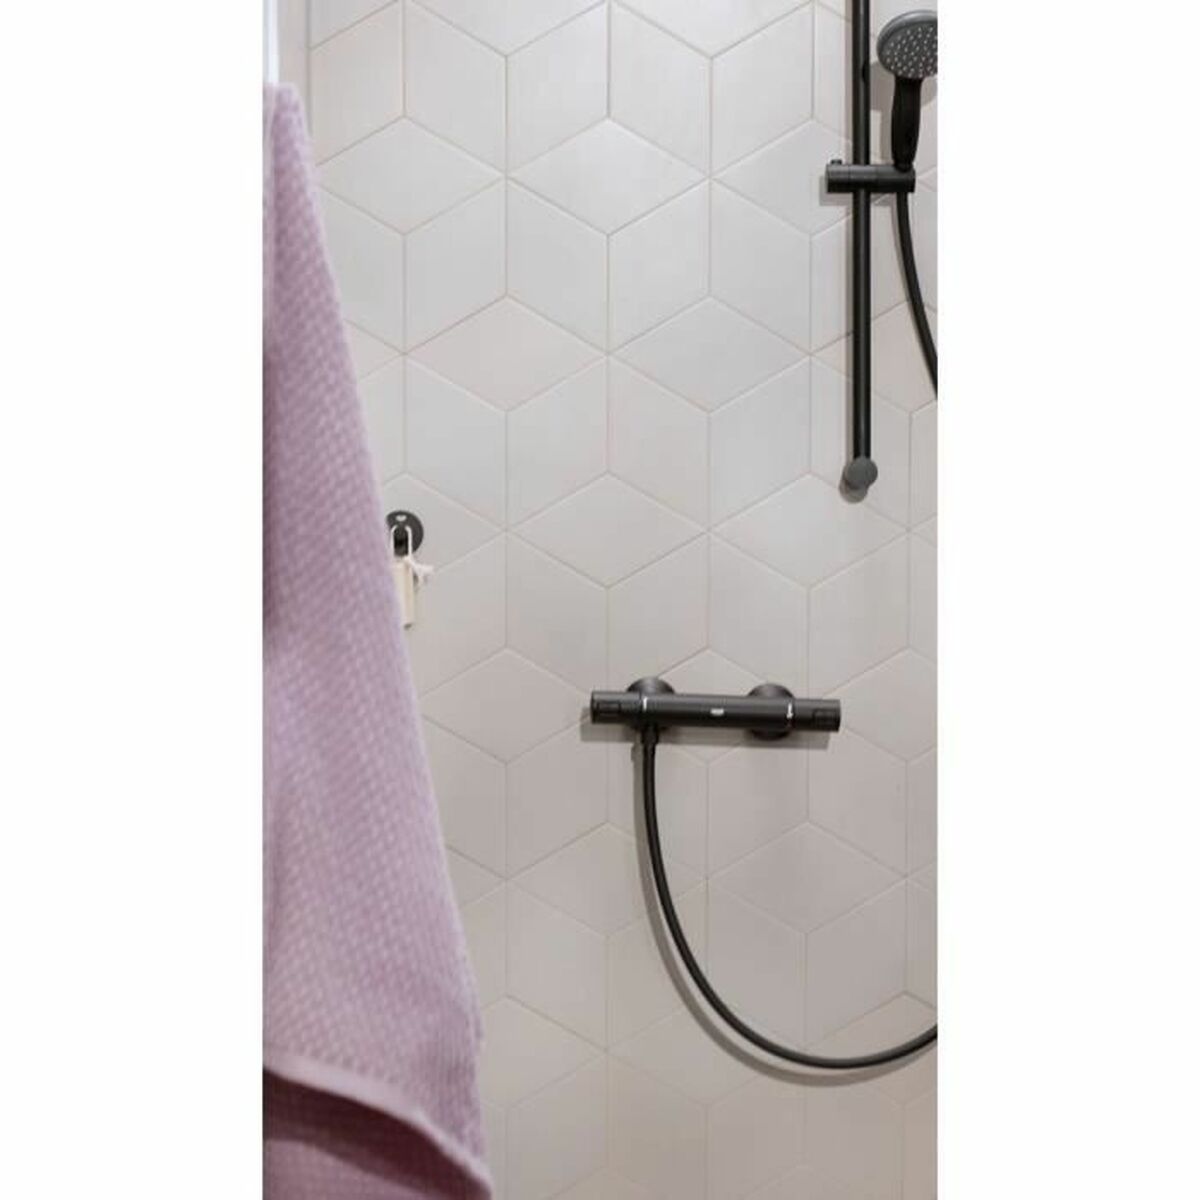 Two-handle Faucet Grohe Precision Start For shower Matte back Metal